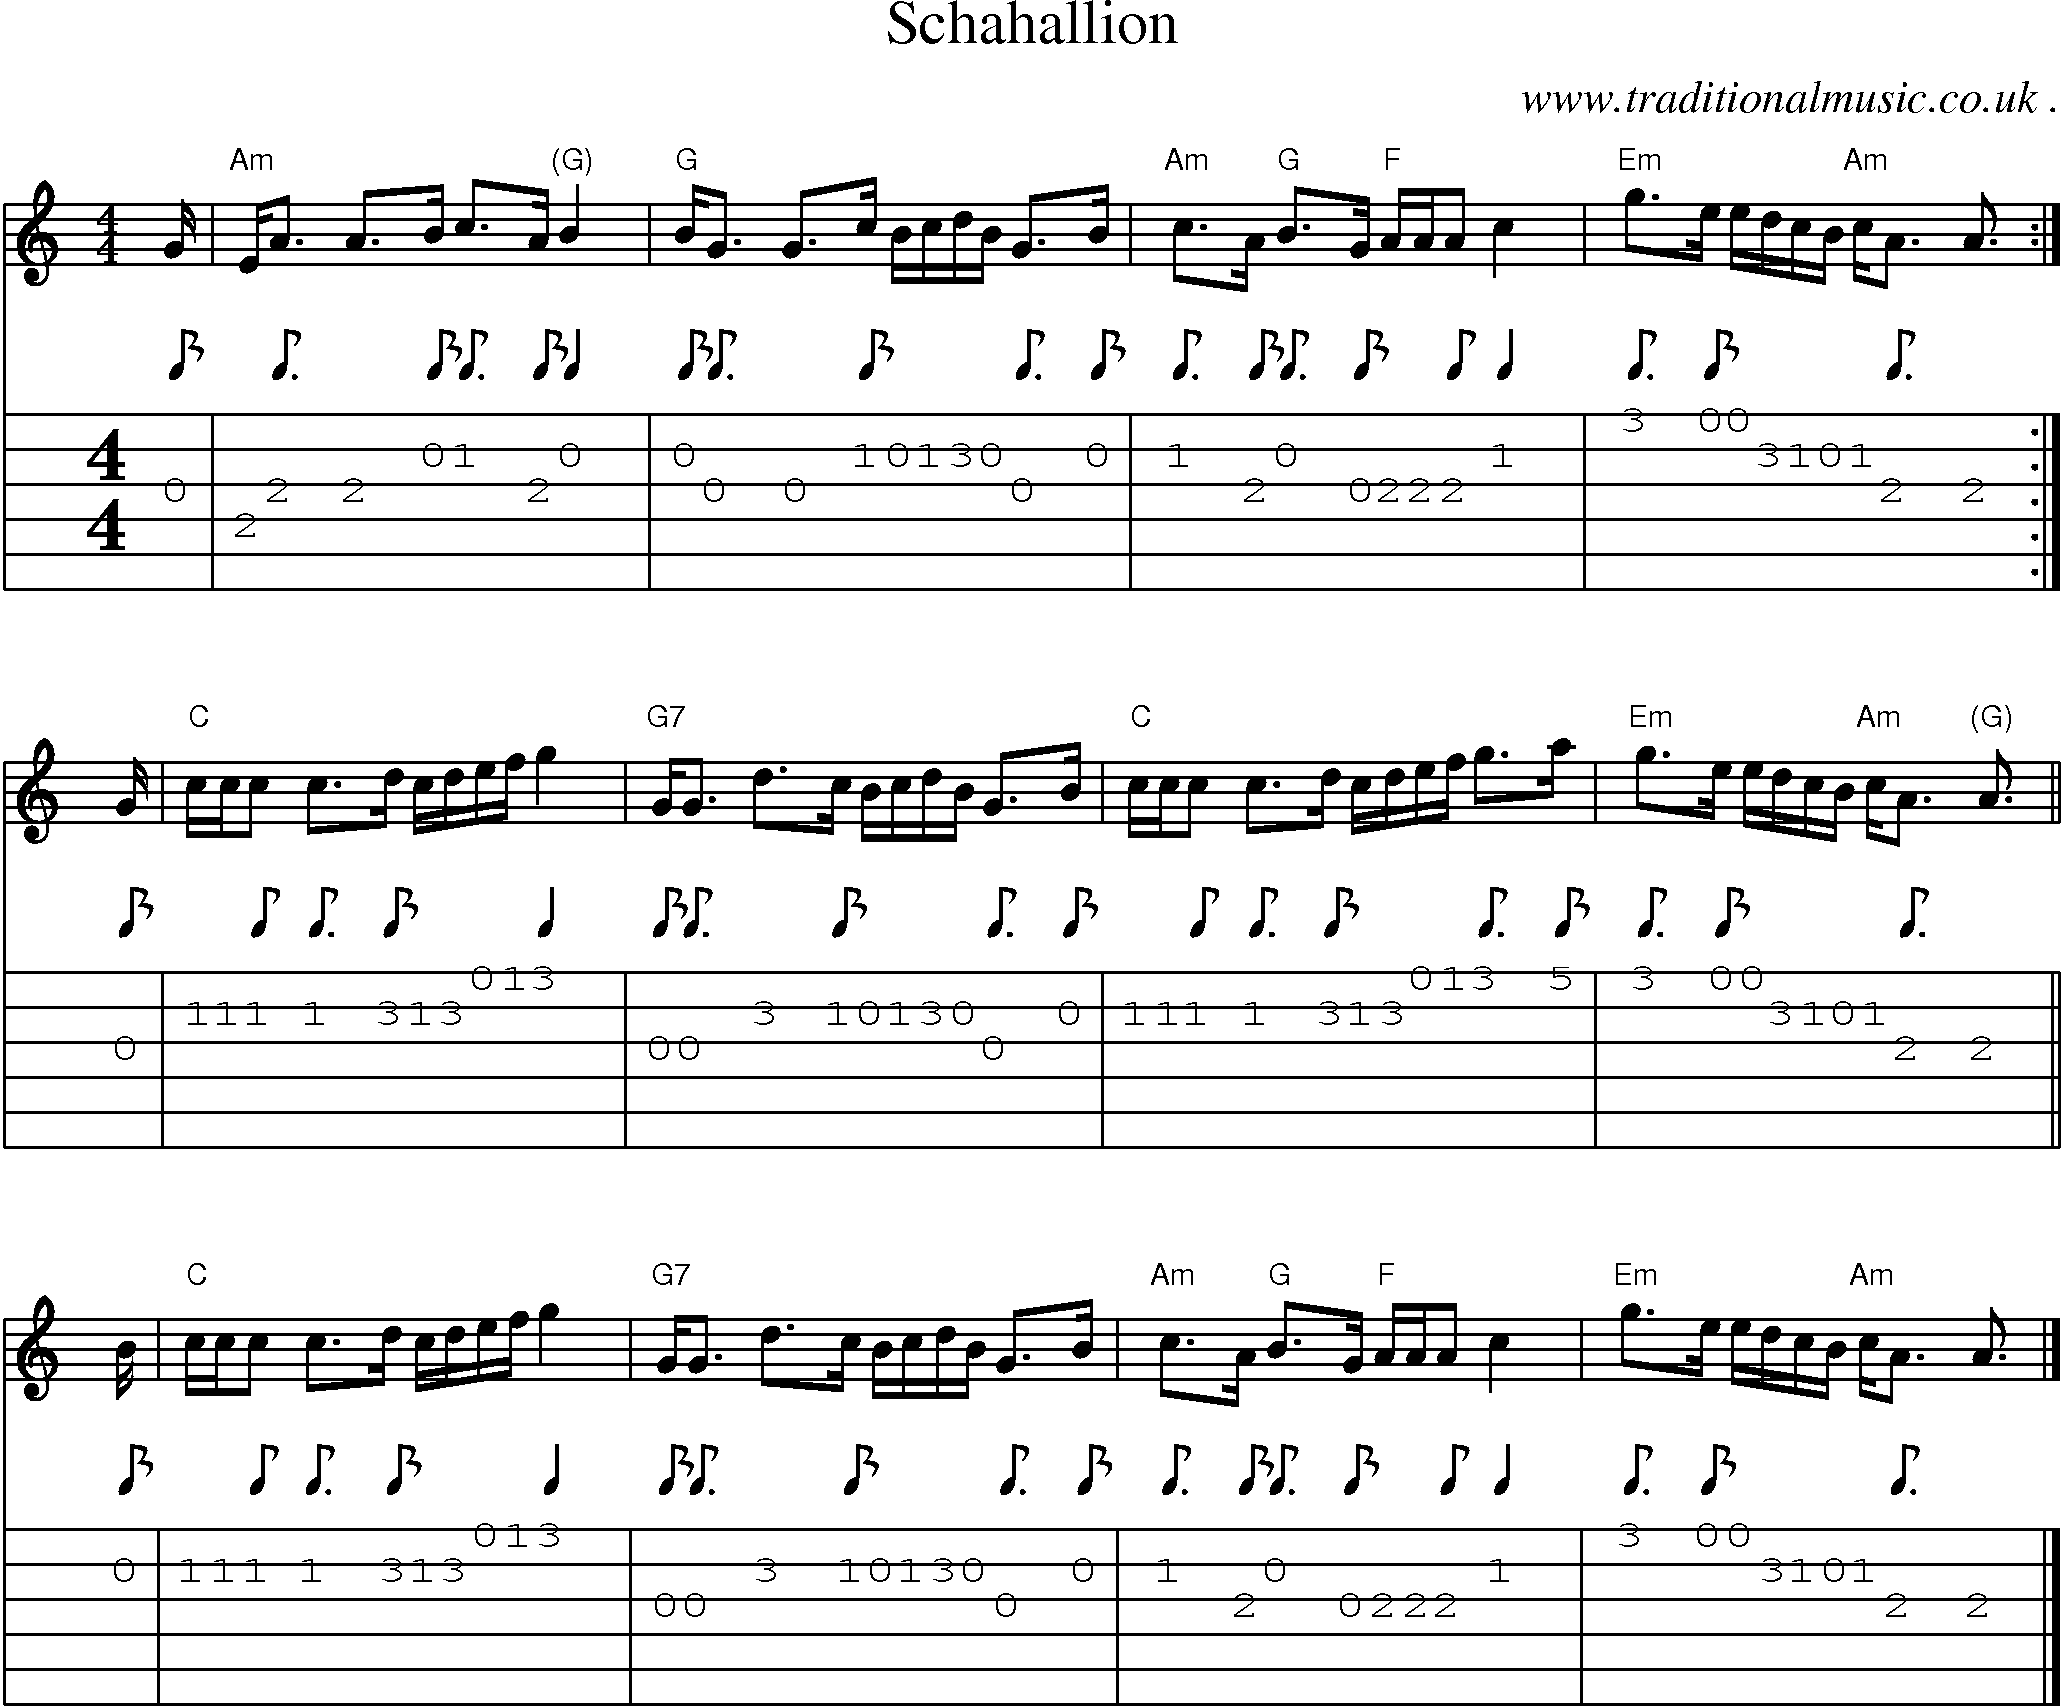 Sheet-music  score, Chords and Guitar Tabs for Schahallion